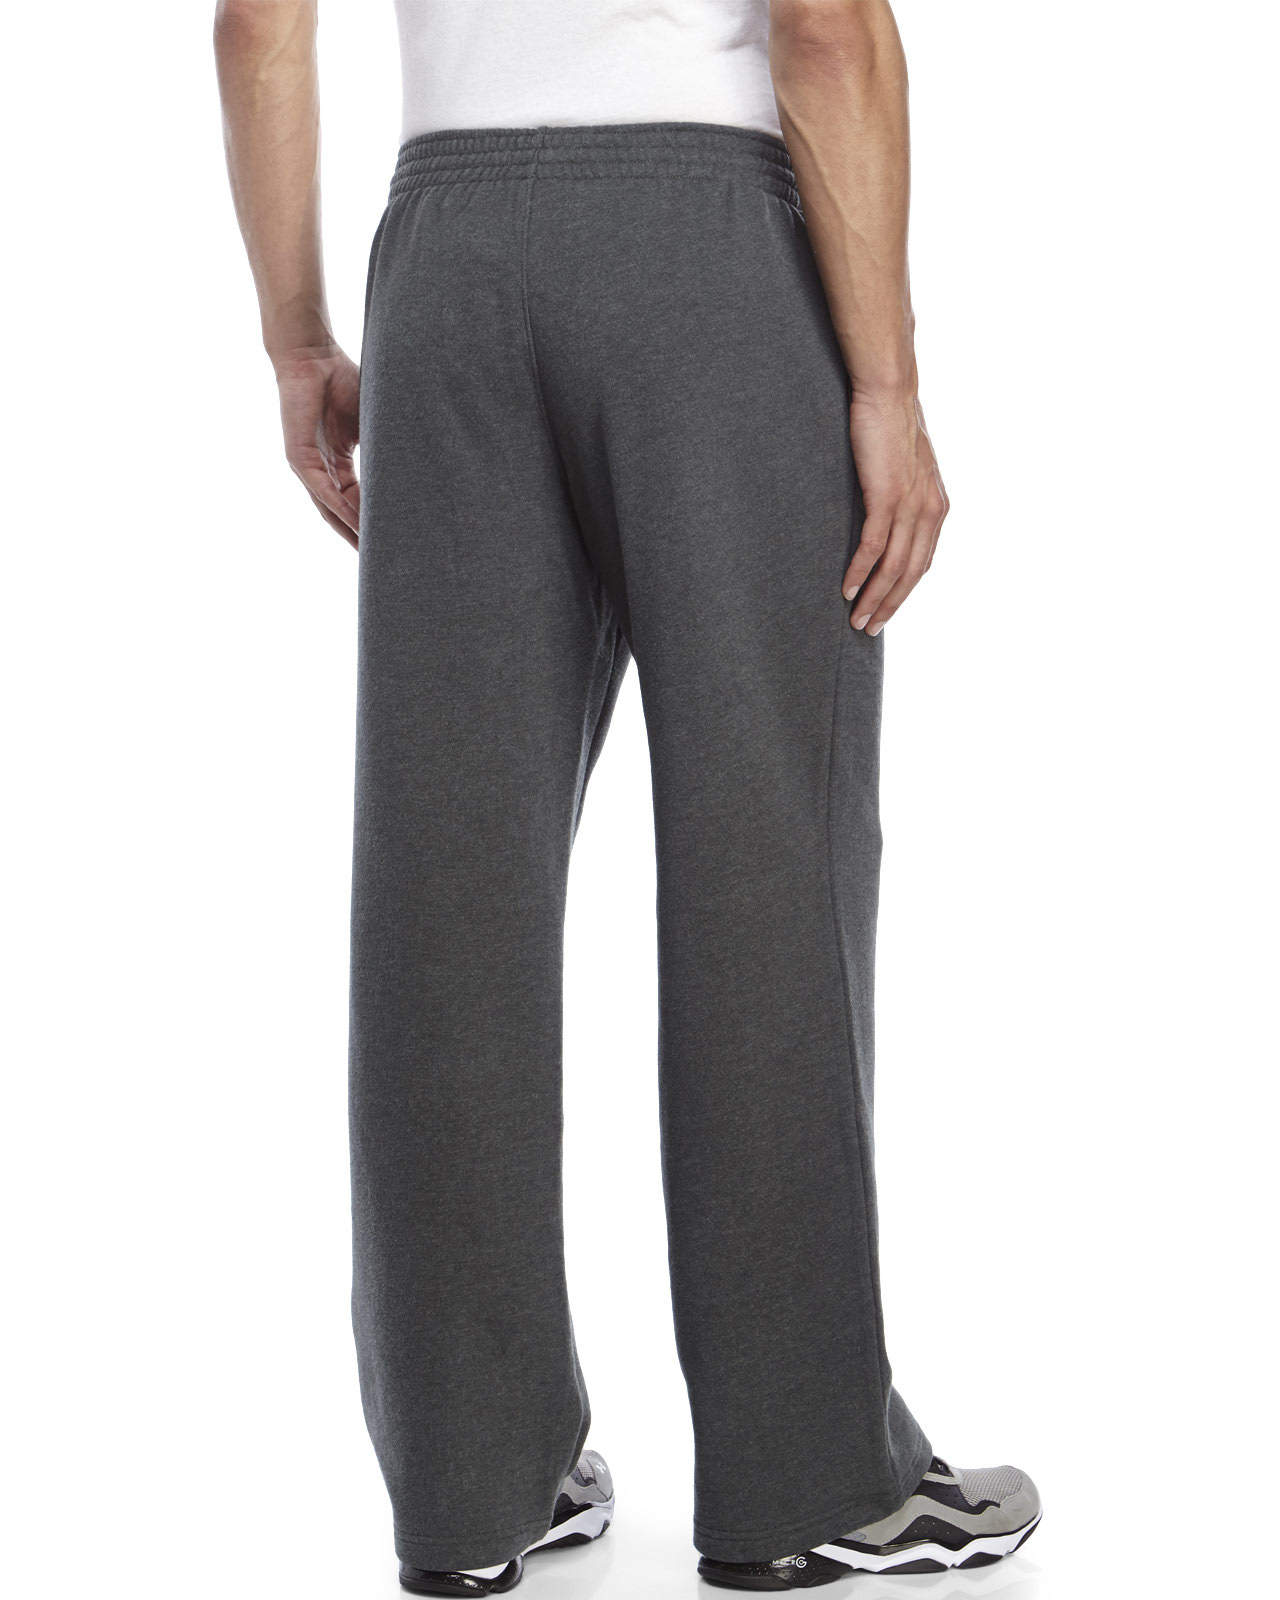 New Balance Essential Fleece Sweatpants in Heather Charcoal (Gray) for ...